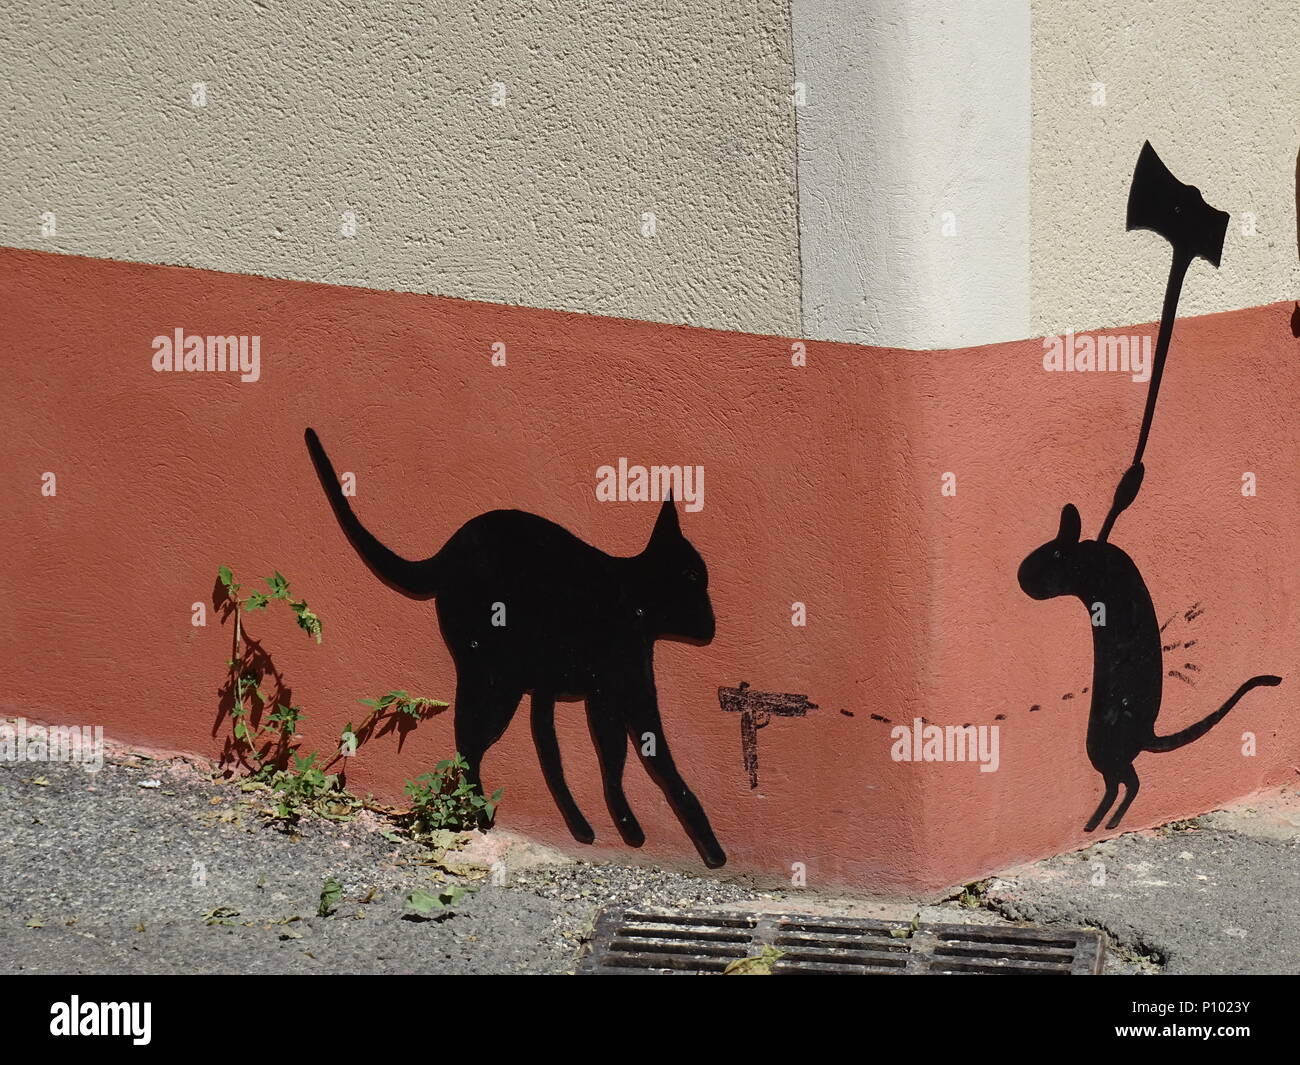 Fun And Ironic Drawings On A Side Wall In A Small Town Of A Cat And Mouse War Game Stock Photo Alamy